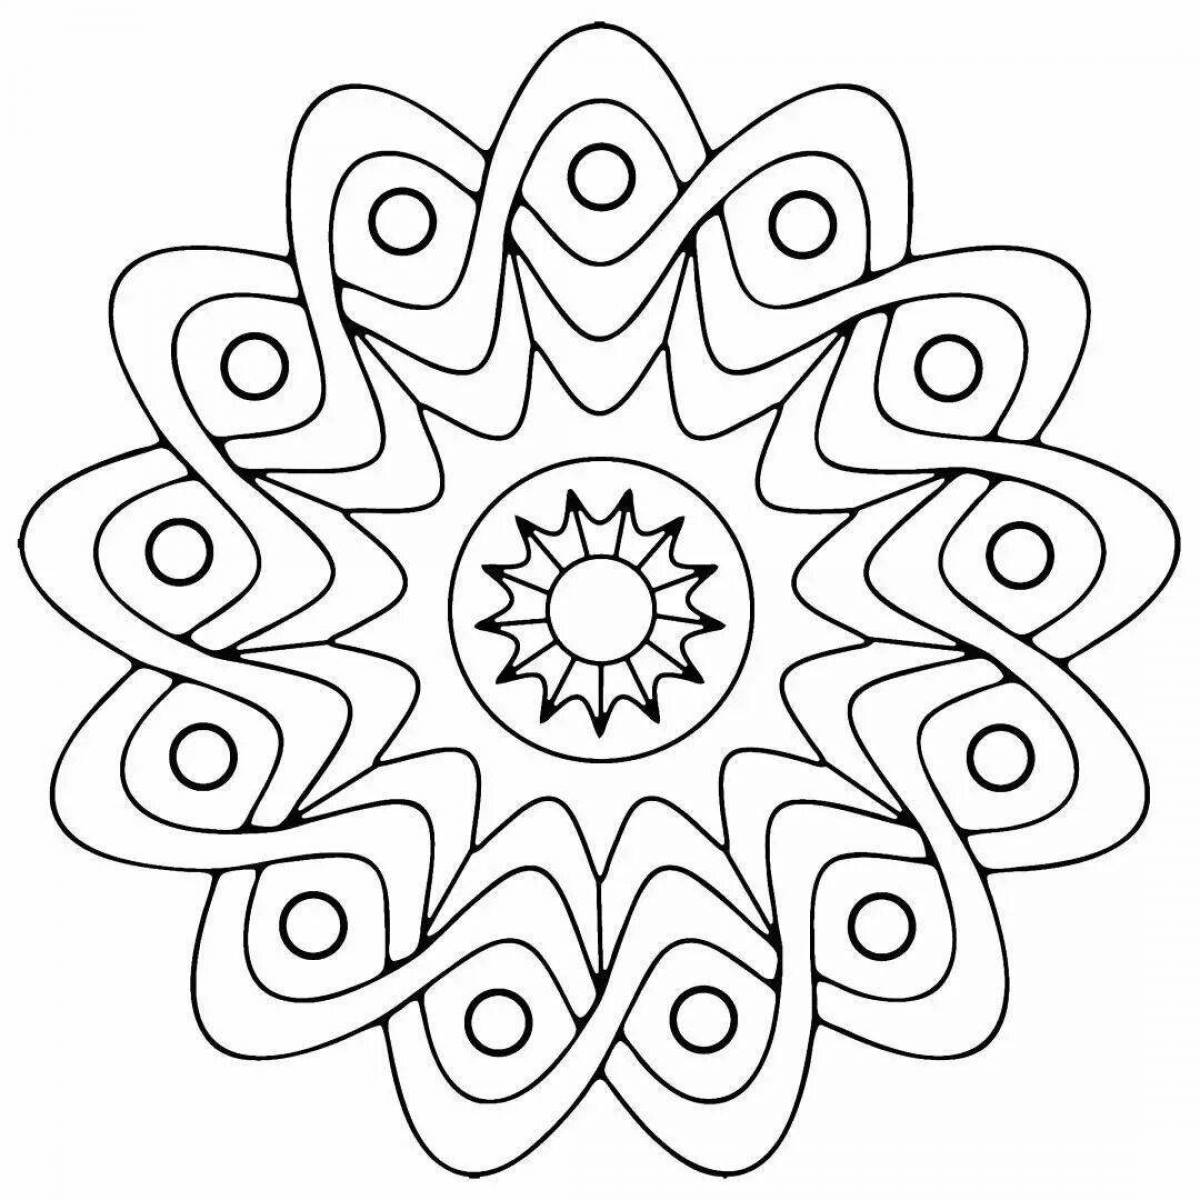 Fancy coloring templates